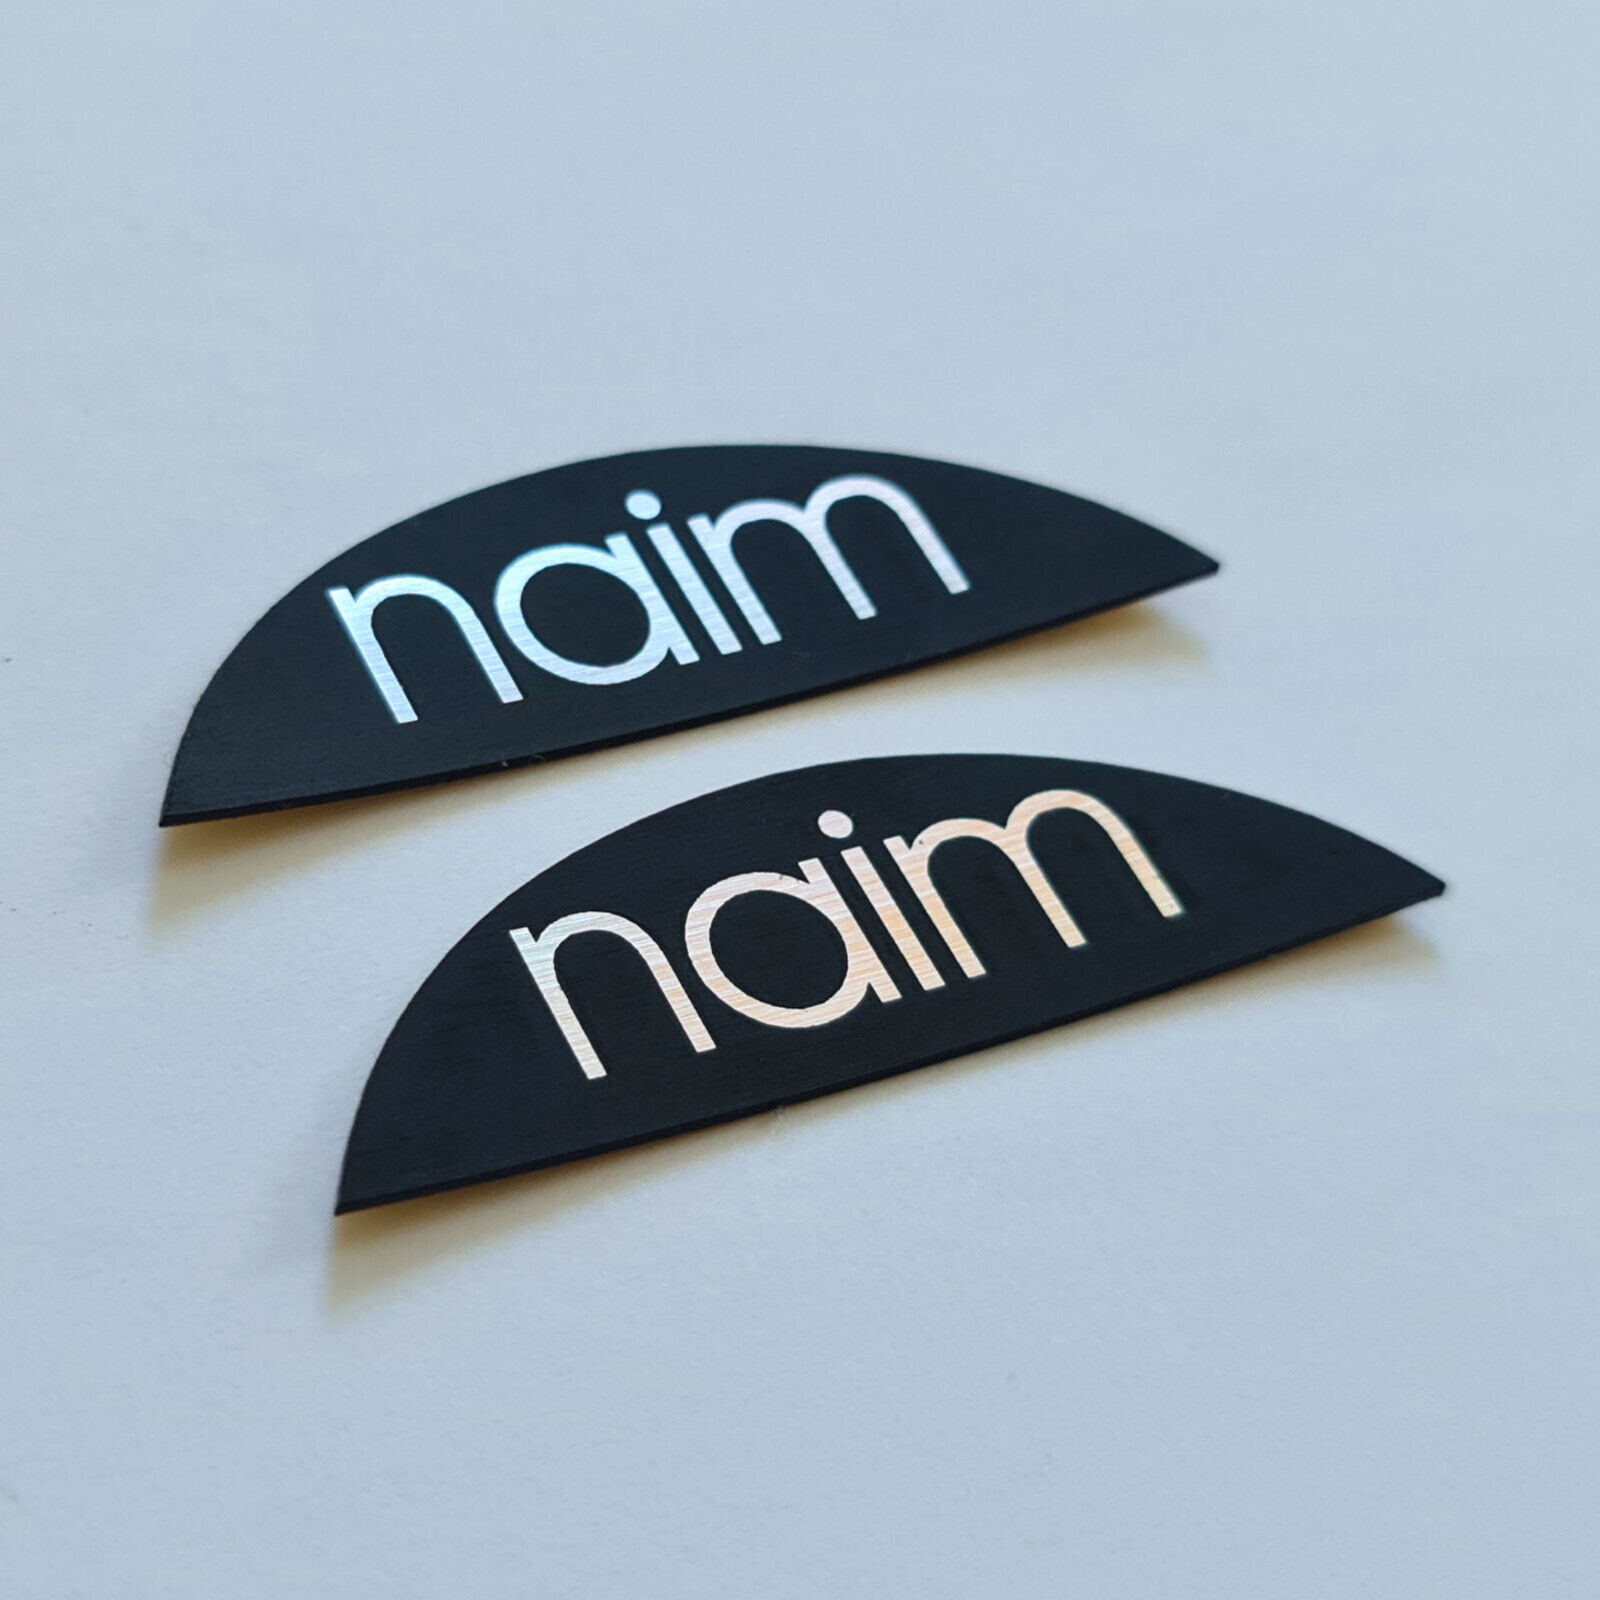 Naim Audio - Sticker Case Badge Decal - Chrome Reflective - Set of Two Pieces